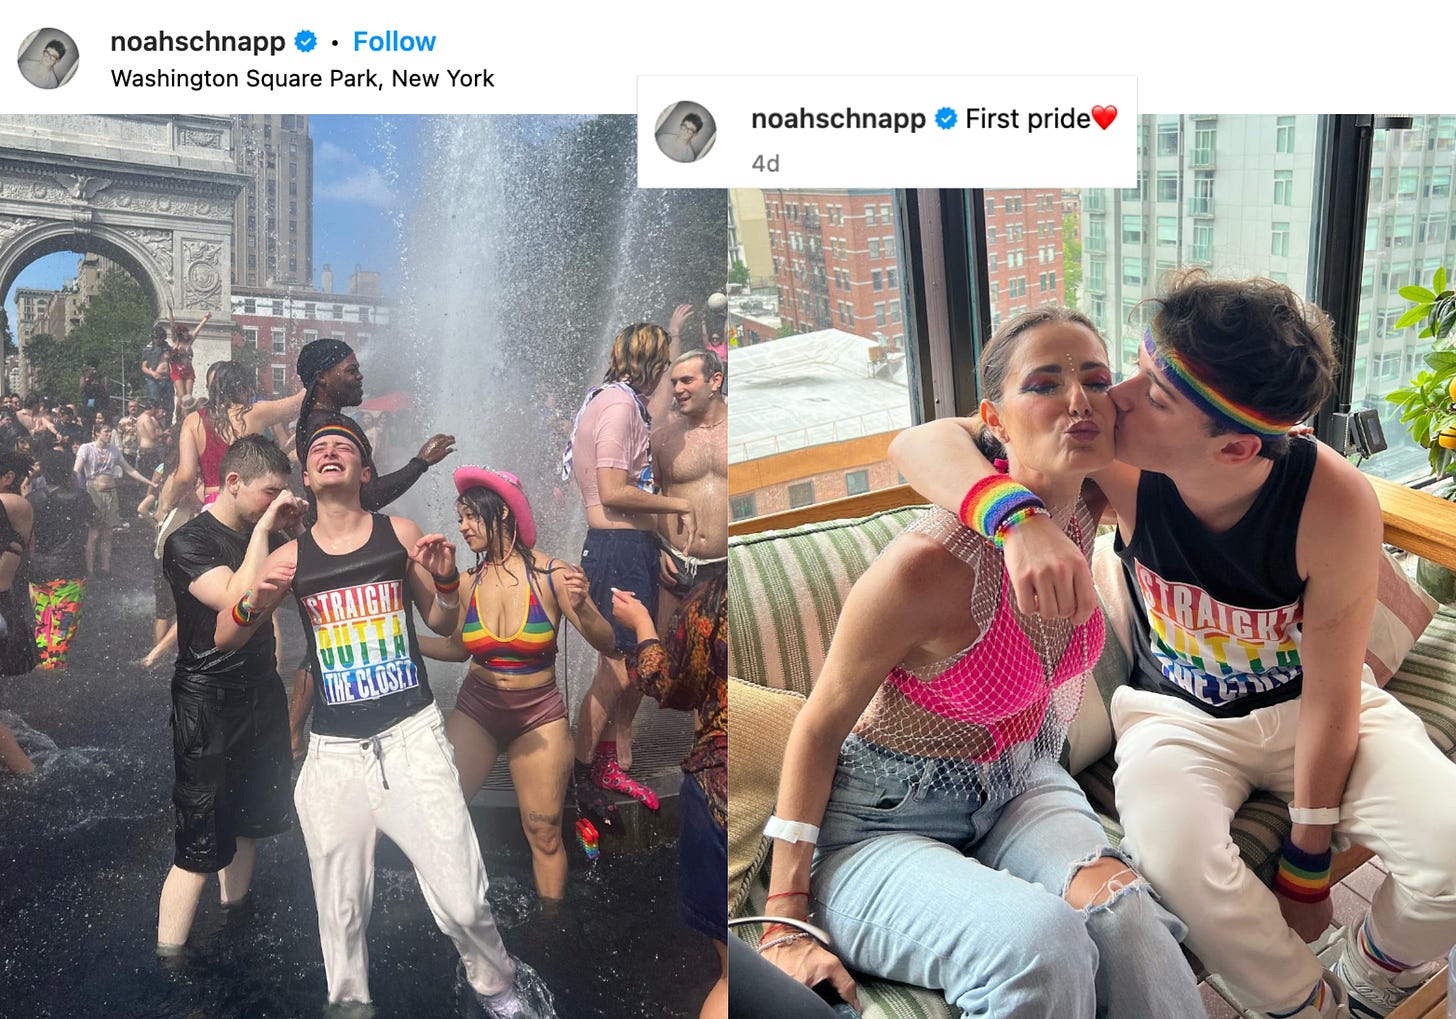 Noah Schnapp Instagram post celebrating Pride wearing a shirt that says Straight Outta The Closet in Washington Square Park and kissing his friend on the cheek